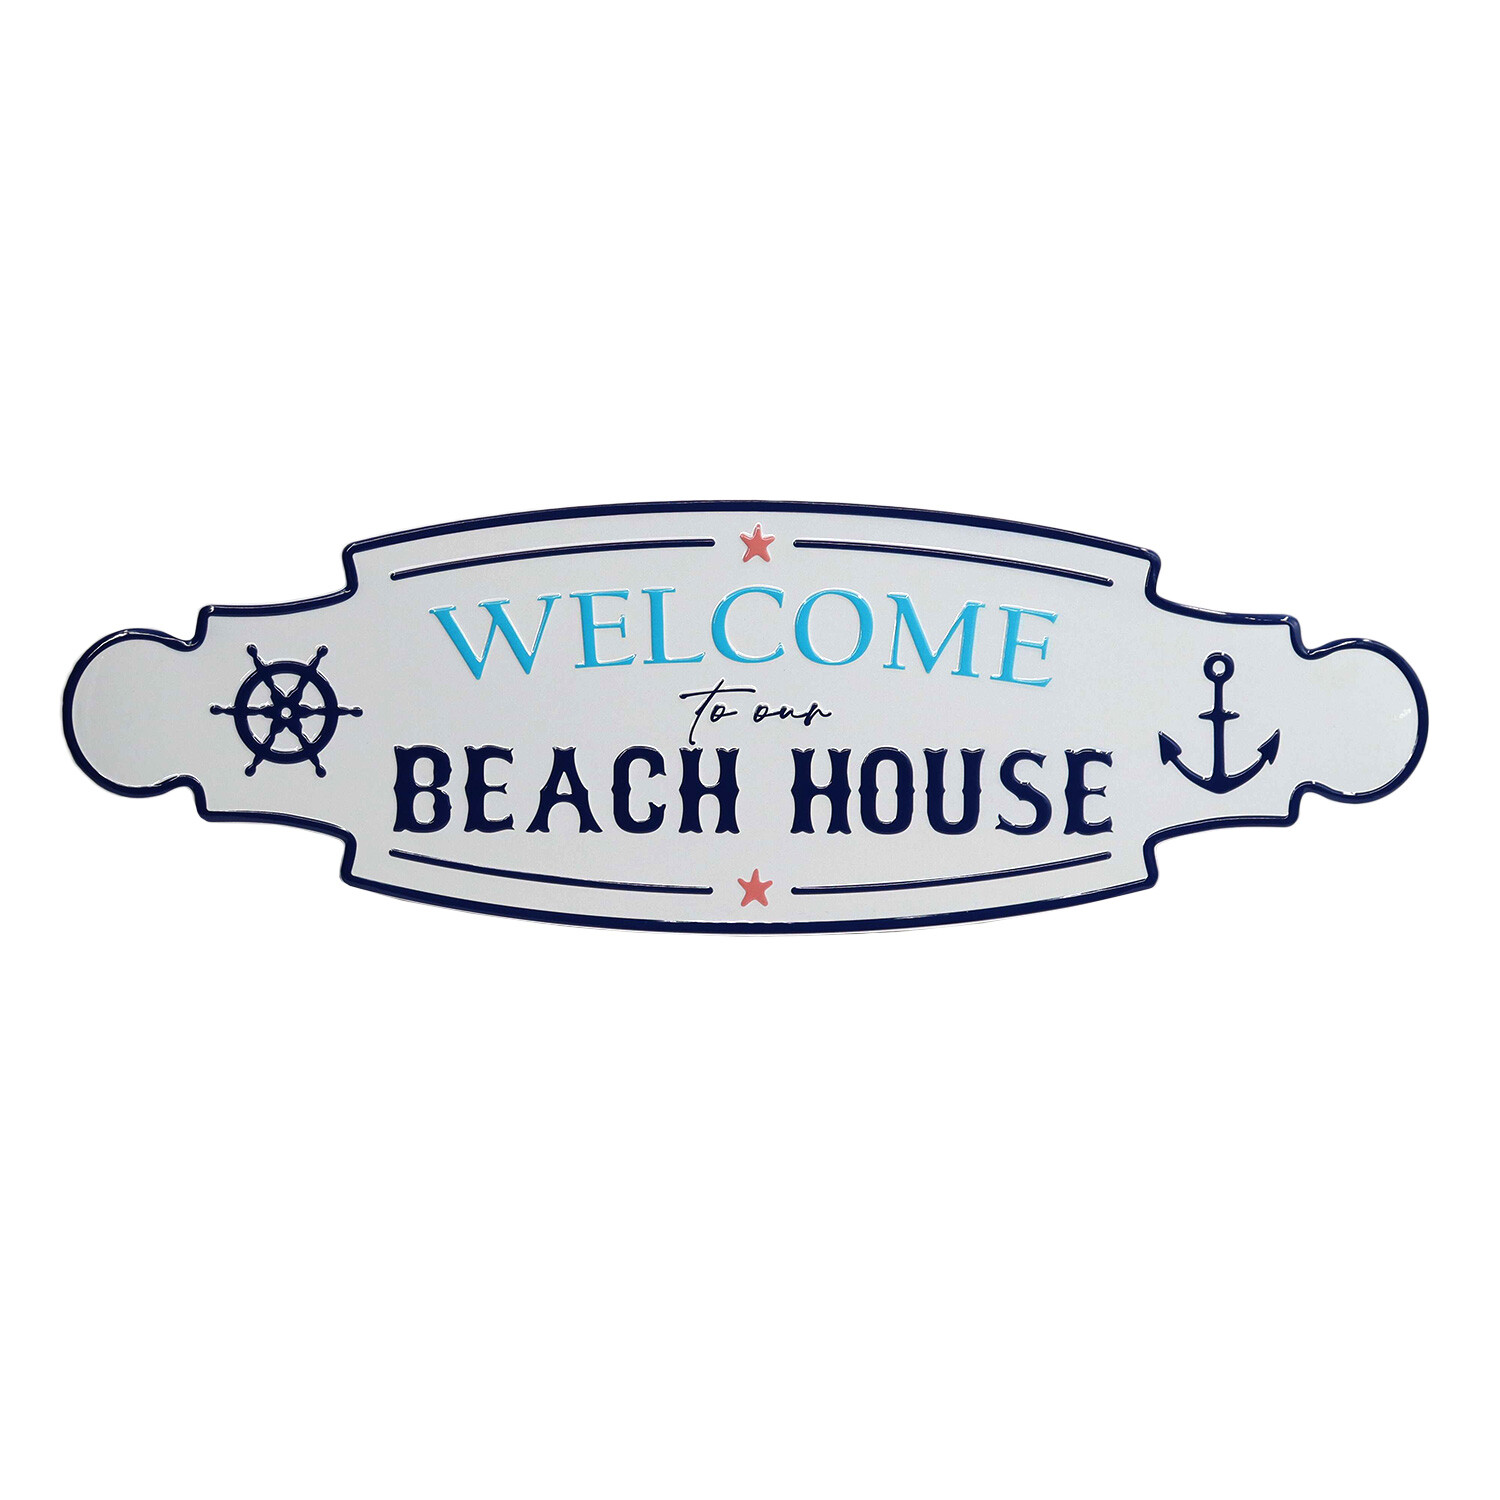 Beach House Embossed Metal Plaque - White Image 1